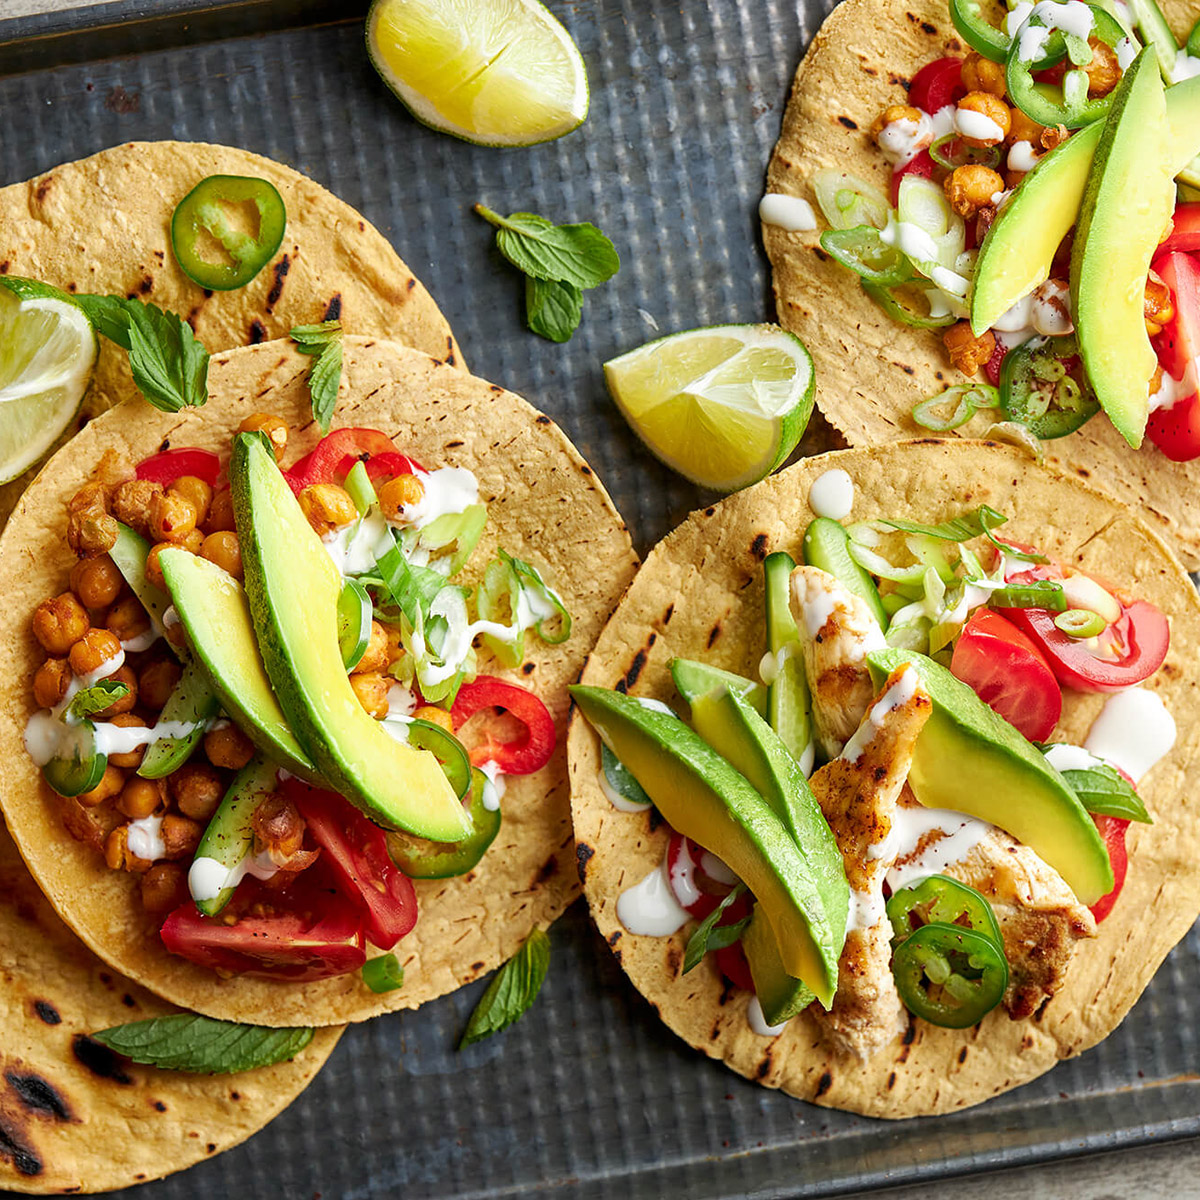 Chicken and/or Roasted Chickpea Fajitas | Avocados from Mexico